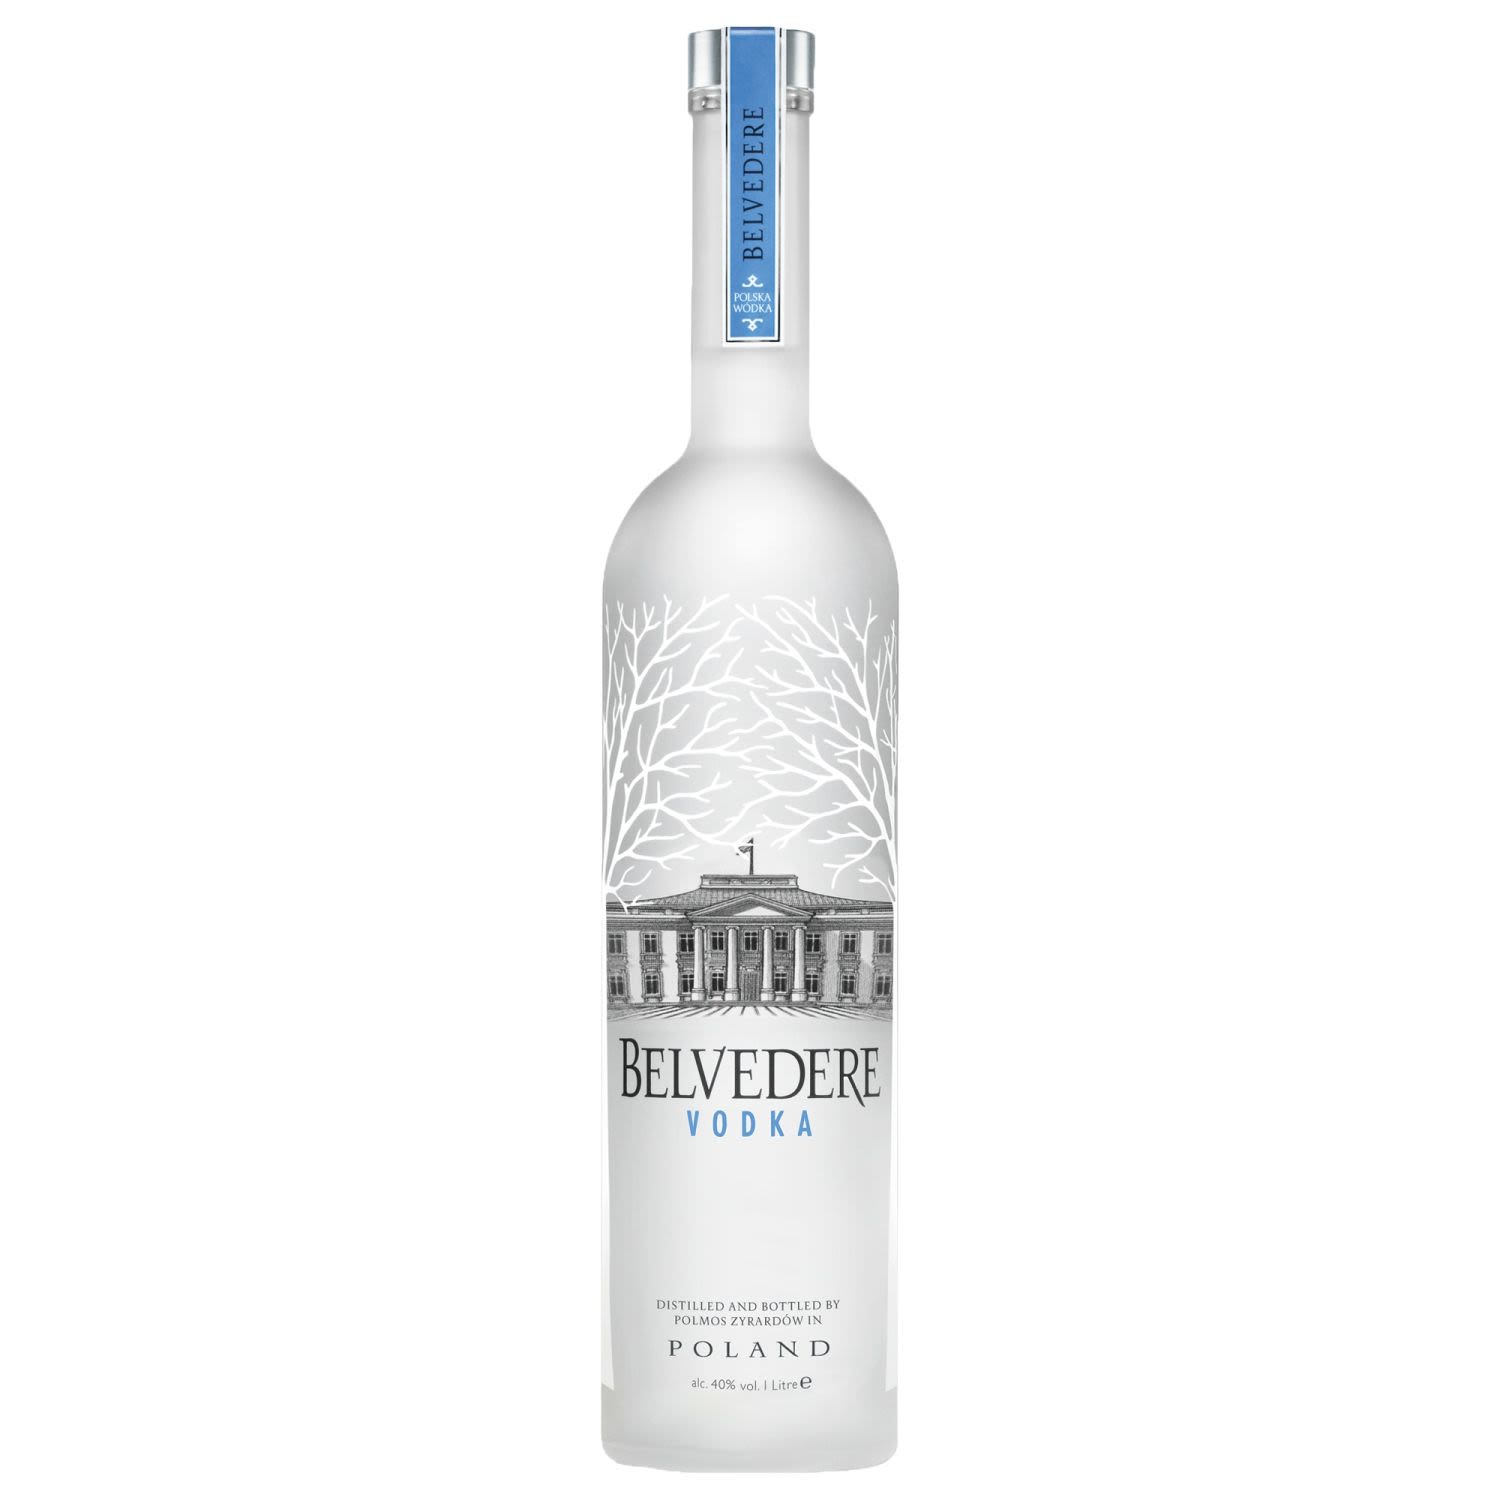 Belvedere was the worlds first super premium vodka and represents the pinnacle of the Polish vodka making tradition. Belvedere is exclusively distilled using Dankowskie Gold Rye and is additive free and quadruple distilled for greater purity. This is a vodka that combines over 600 years of vodka producing expertise in the one bottle.<br /> <br />Alcohol Volume: 40.00%<br /><br />Pack Format: Bottle<br /><br />Standard Drinks: 31.6</br /><br />Pack Type: Bottle<br /><br />Country of Origin: Poland<br />